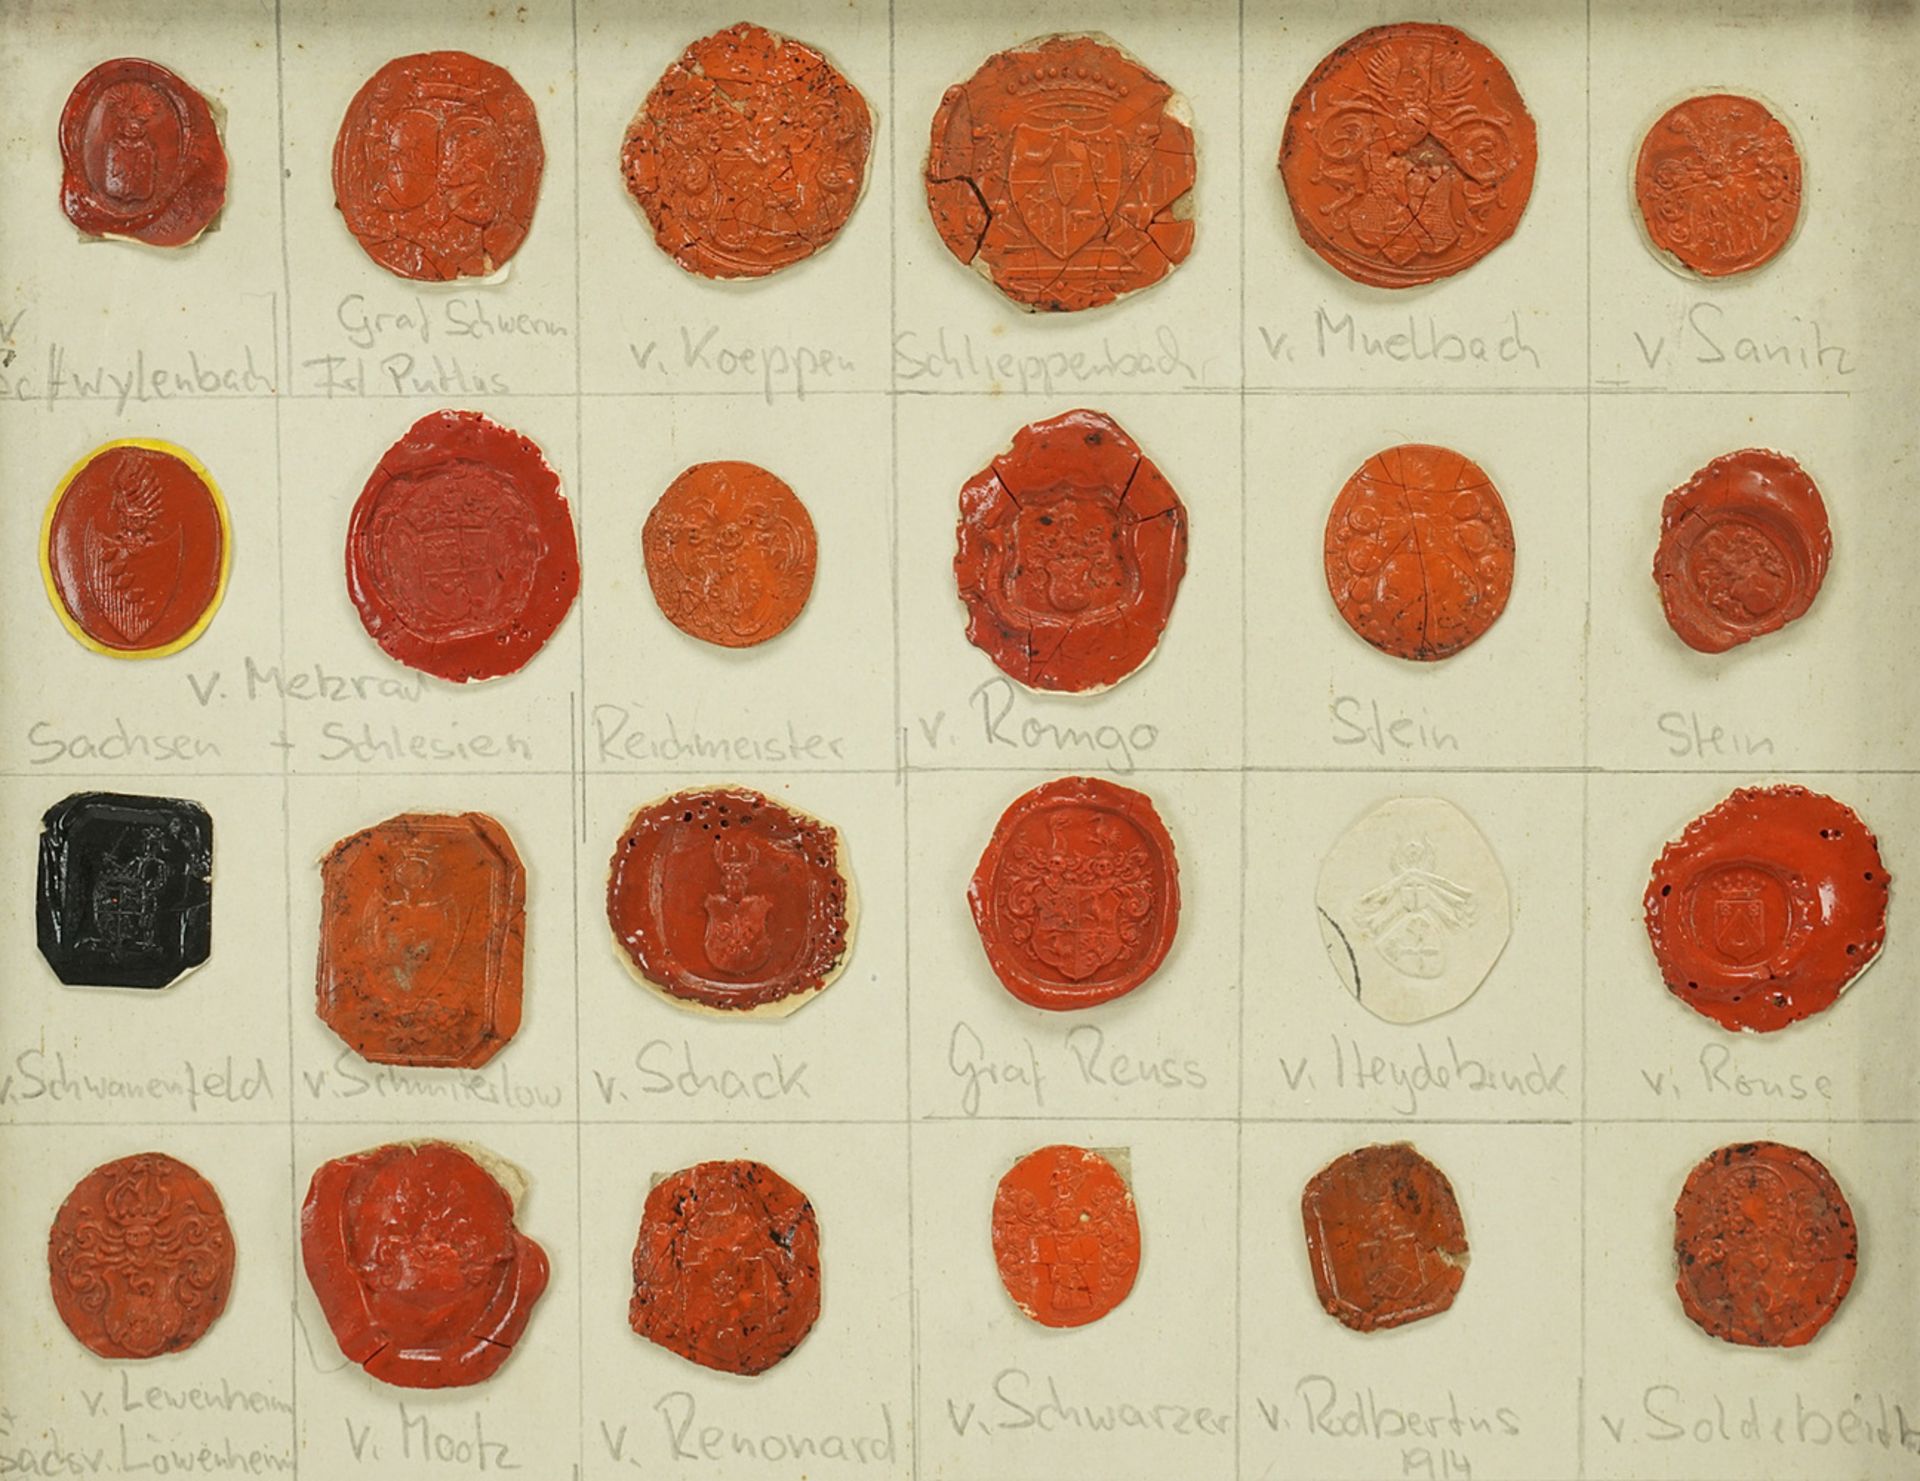 77 imprints of coats of arms seals of noble German families - Image 2 of 3